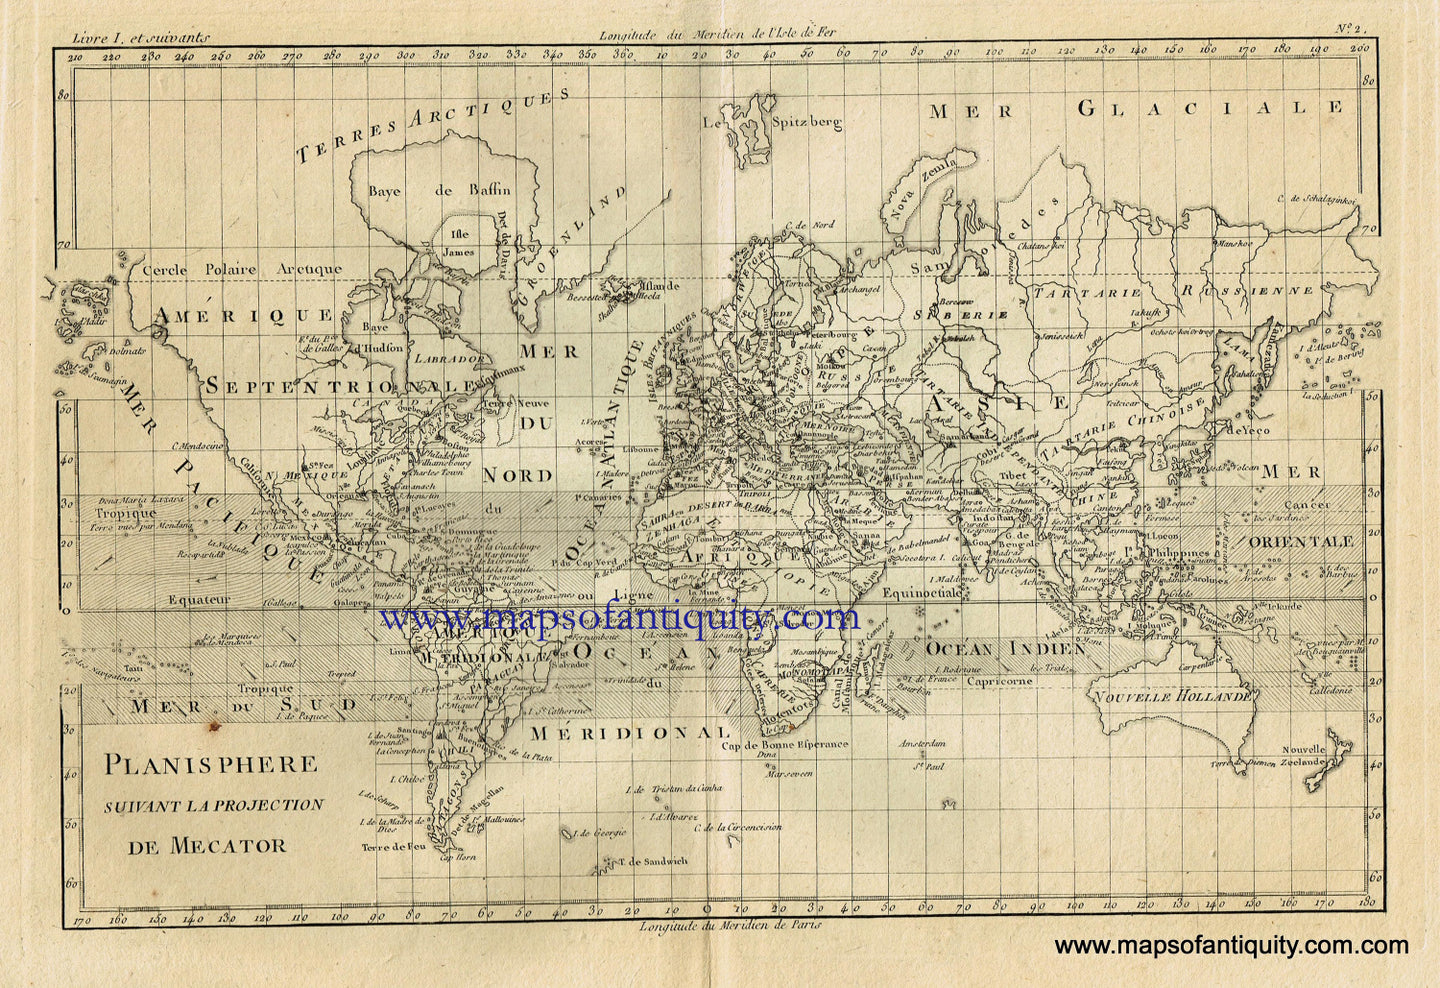 Antique-Map-Planisphere-Suivant-La-Projection-de-Mercator-World-1780-1780s-1700s-Late-18th-Century-Raynal-and-Bonne-Early-Maps-of-Antiquity